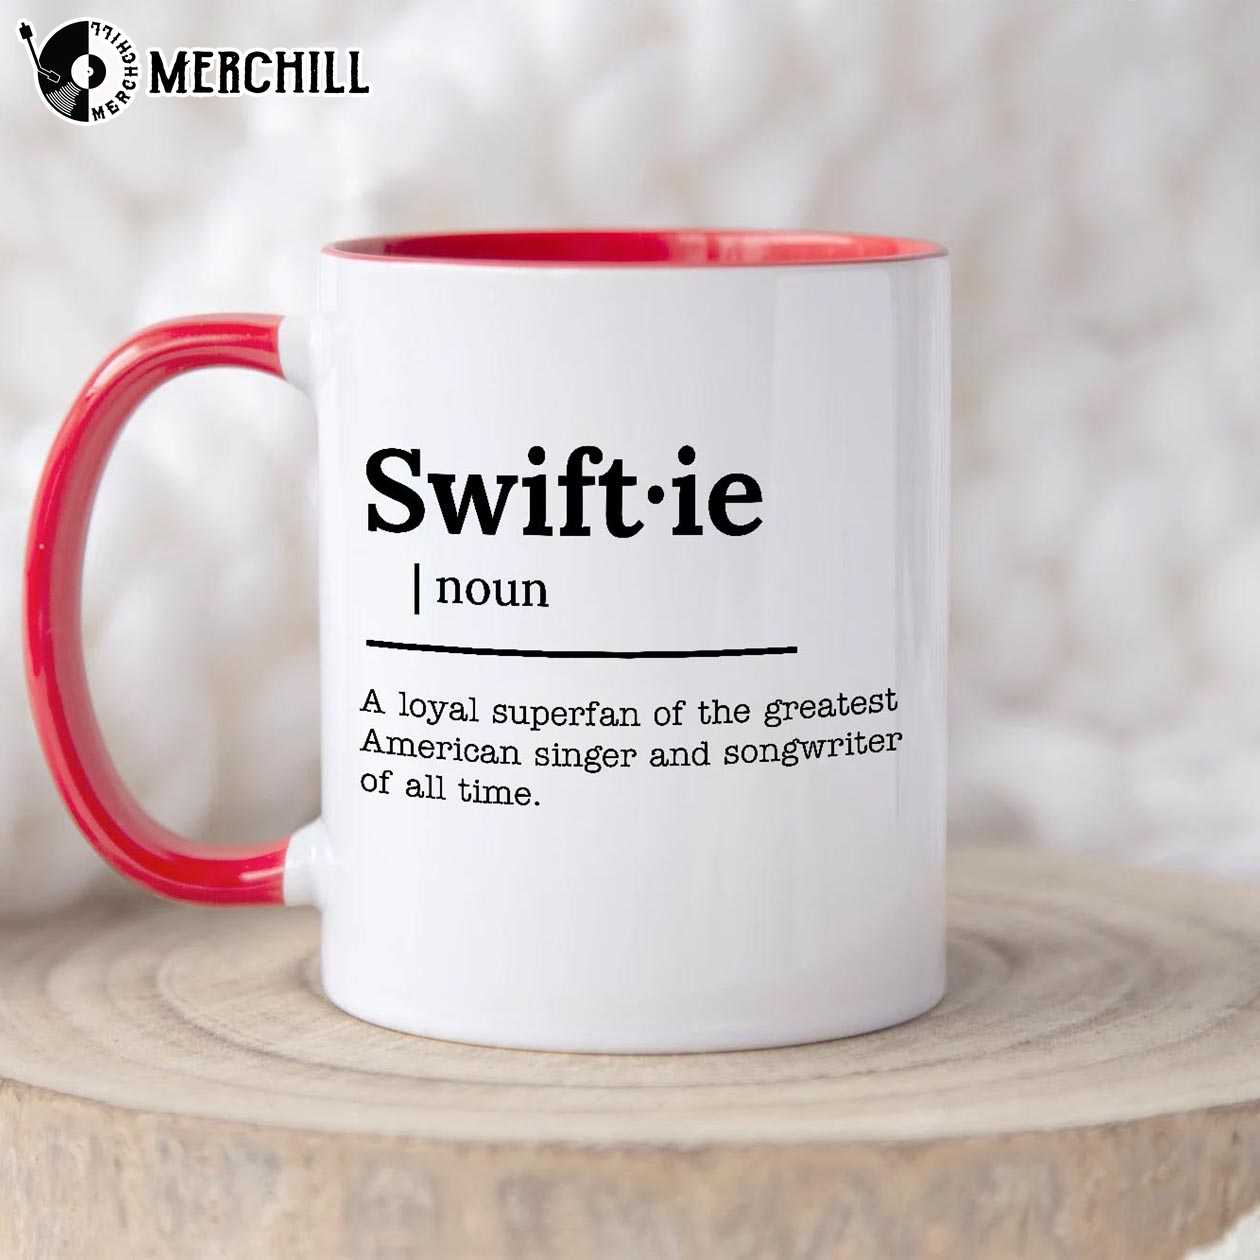 https://images.merchill.com/wp-content/uploads/2022/12/Funny-Swiftie-Definition-Mug-Taylor-Swift-Gifts-for-Fans-3.jpg